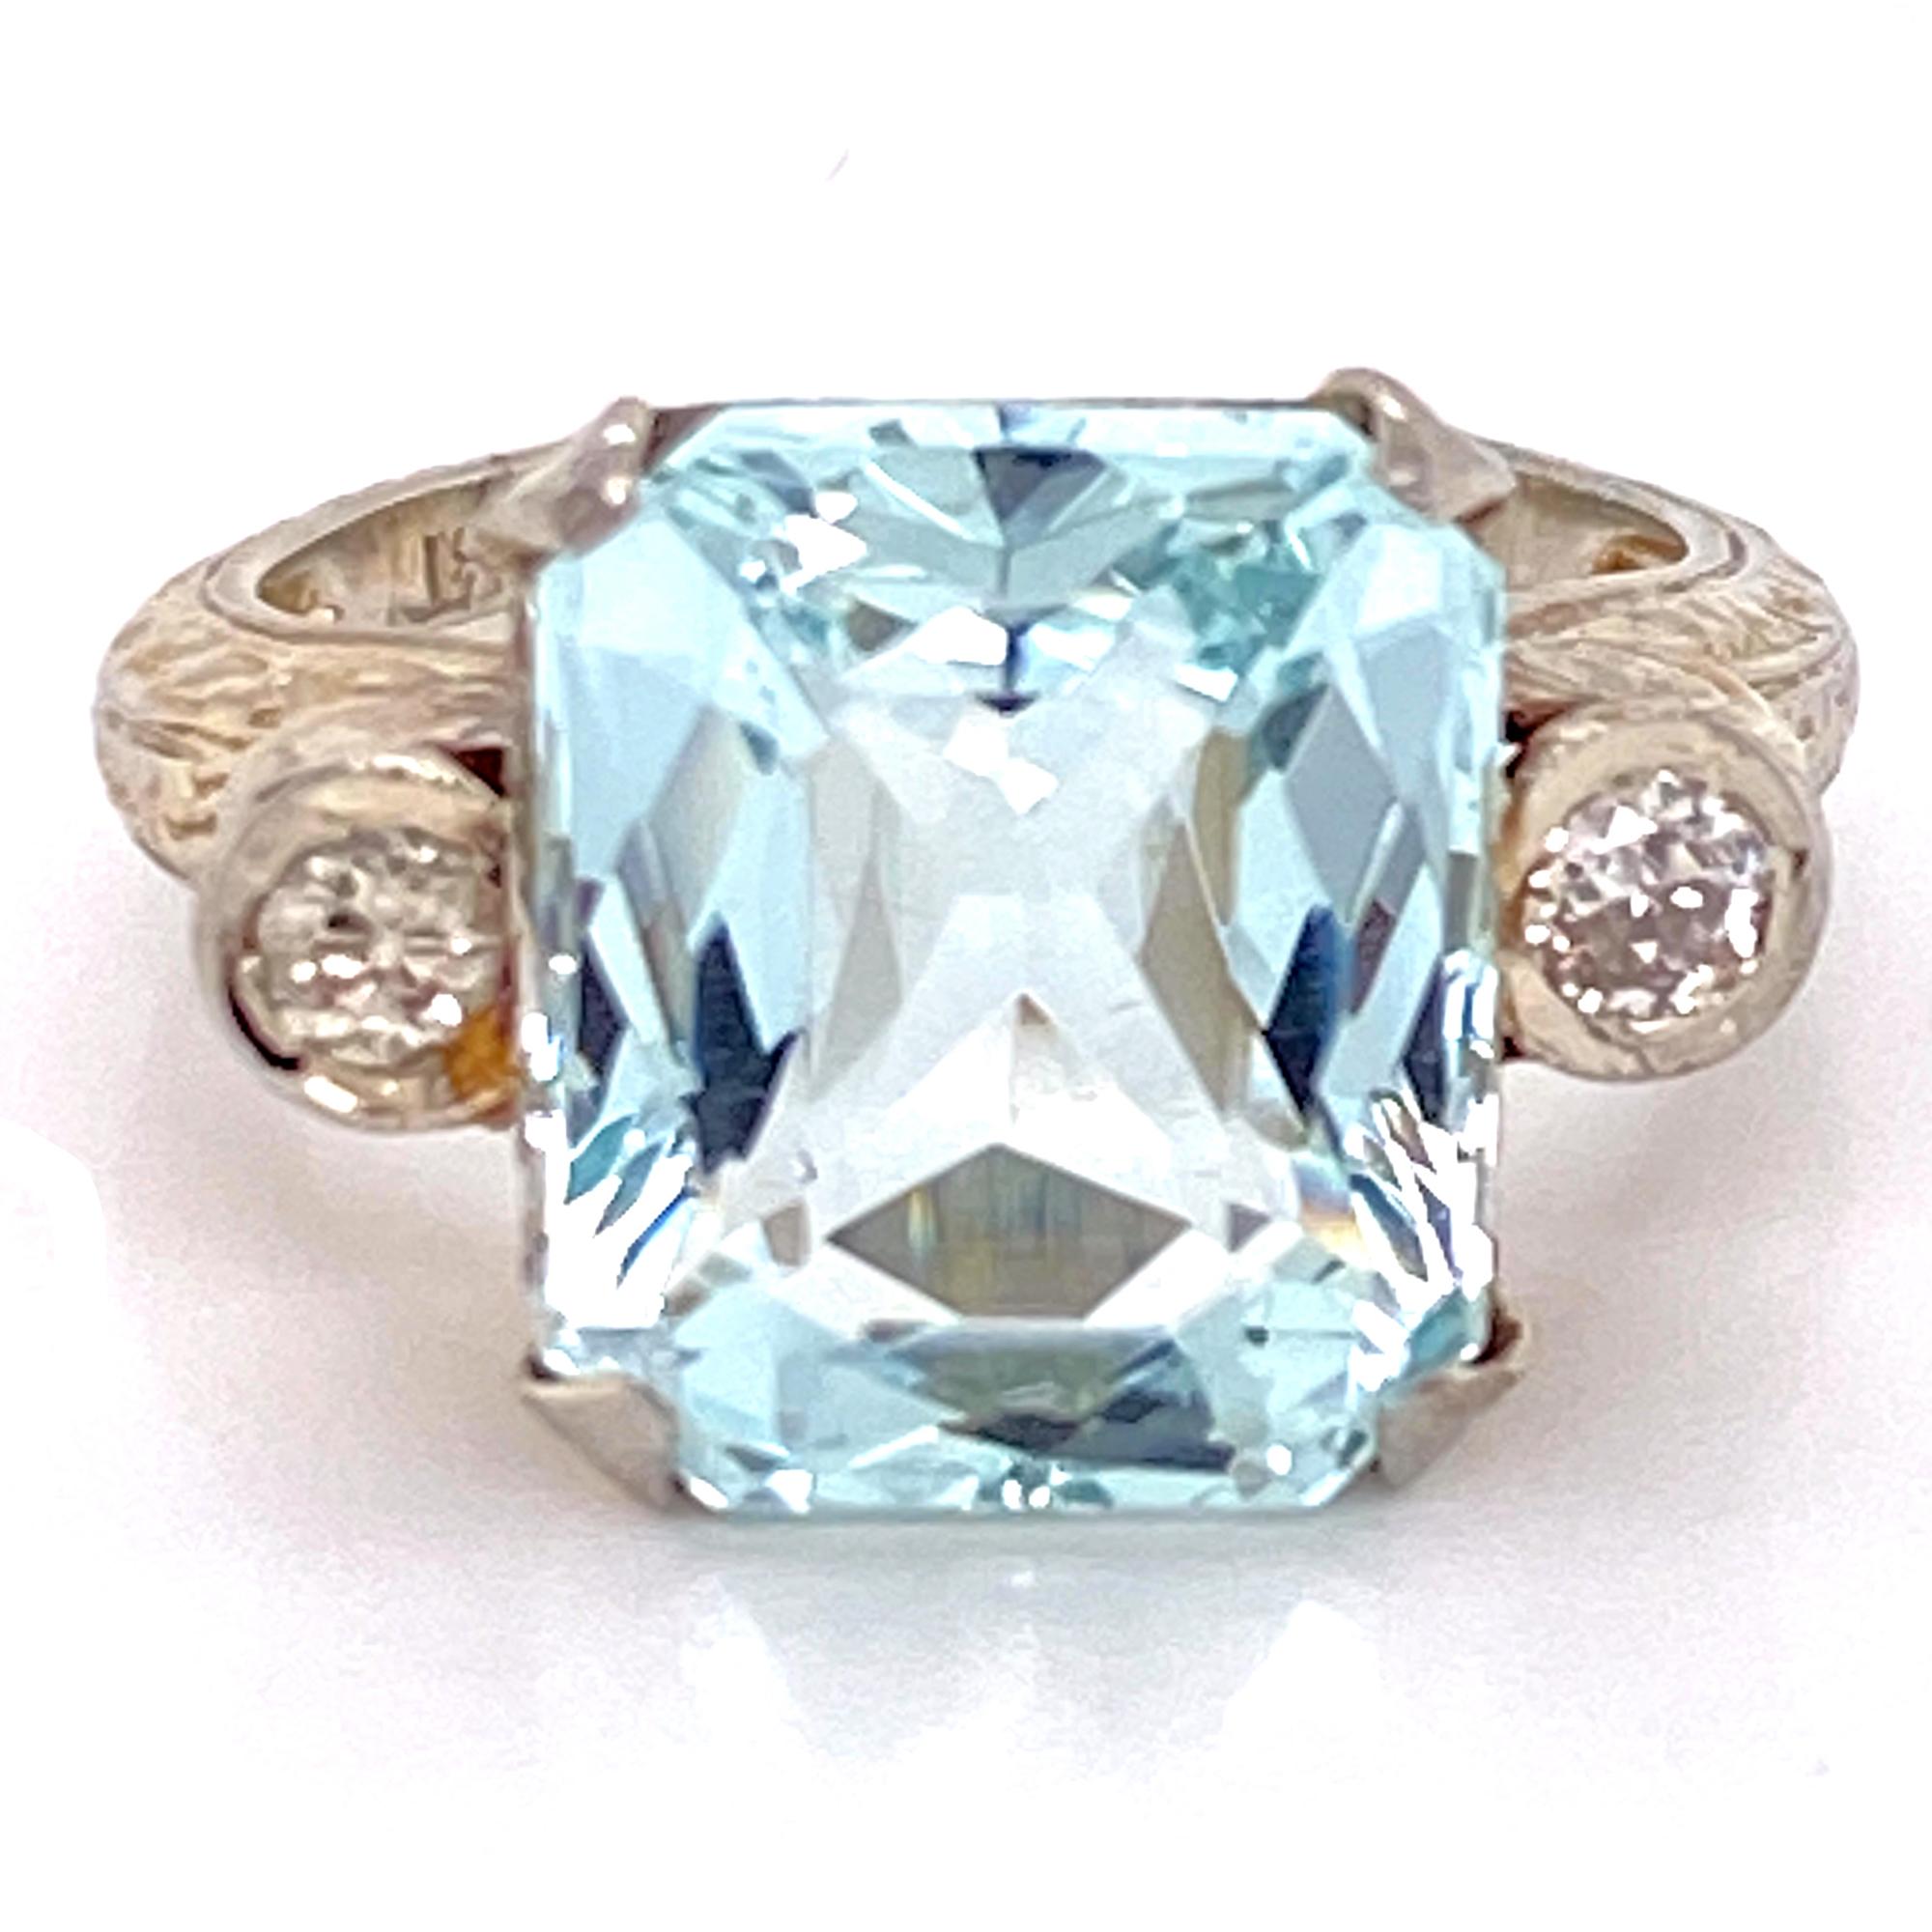 1950's aquamarine and diamond cocktail ring hand made in 18 karat white gold. The ring features a 5.85 carat cushion cut aquamarine flanked by two round brilliant cut diamonds weighing .18 carat total weight. 

The aquamarine measures 10 x 12.5mm,